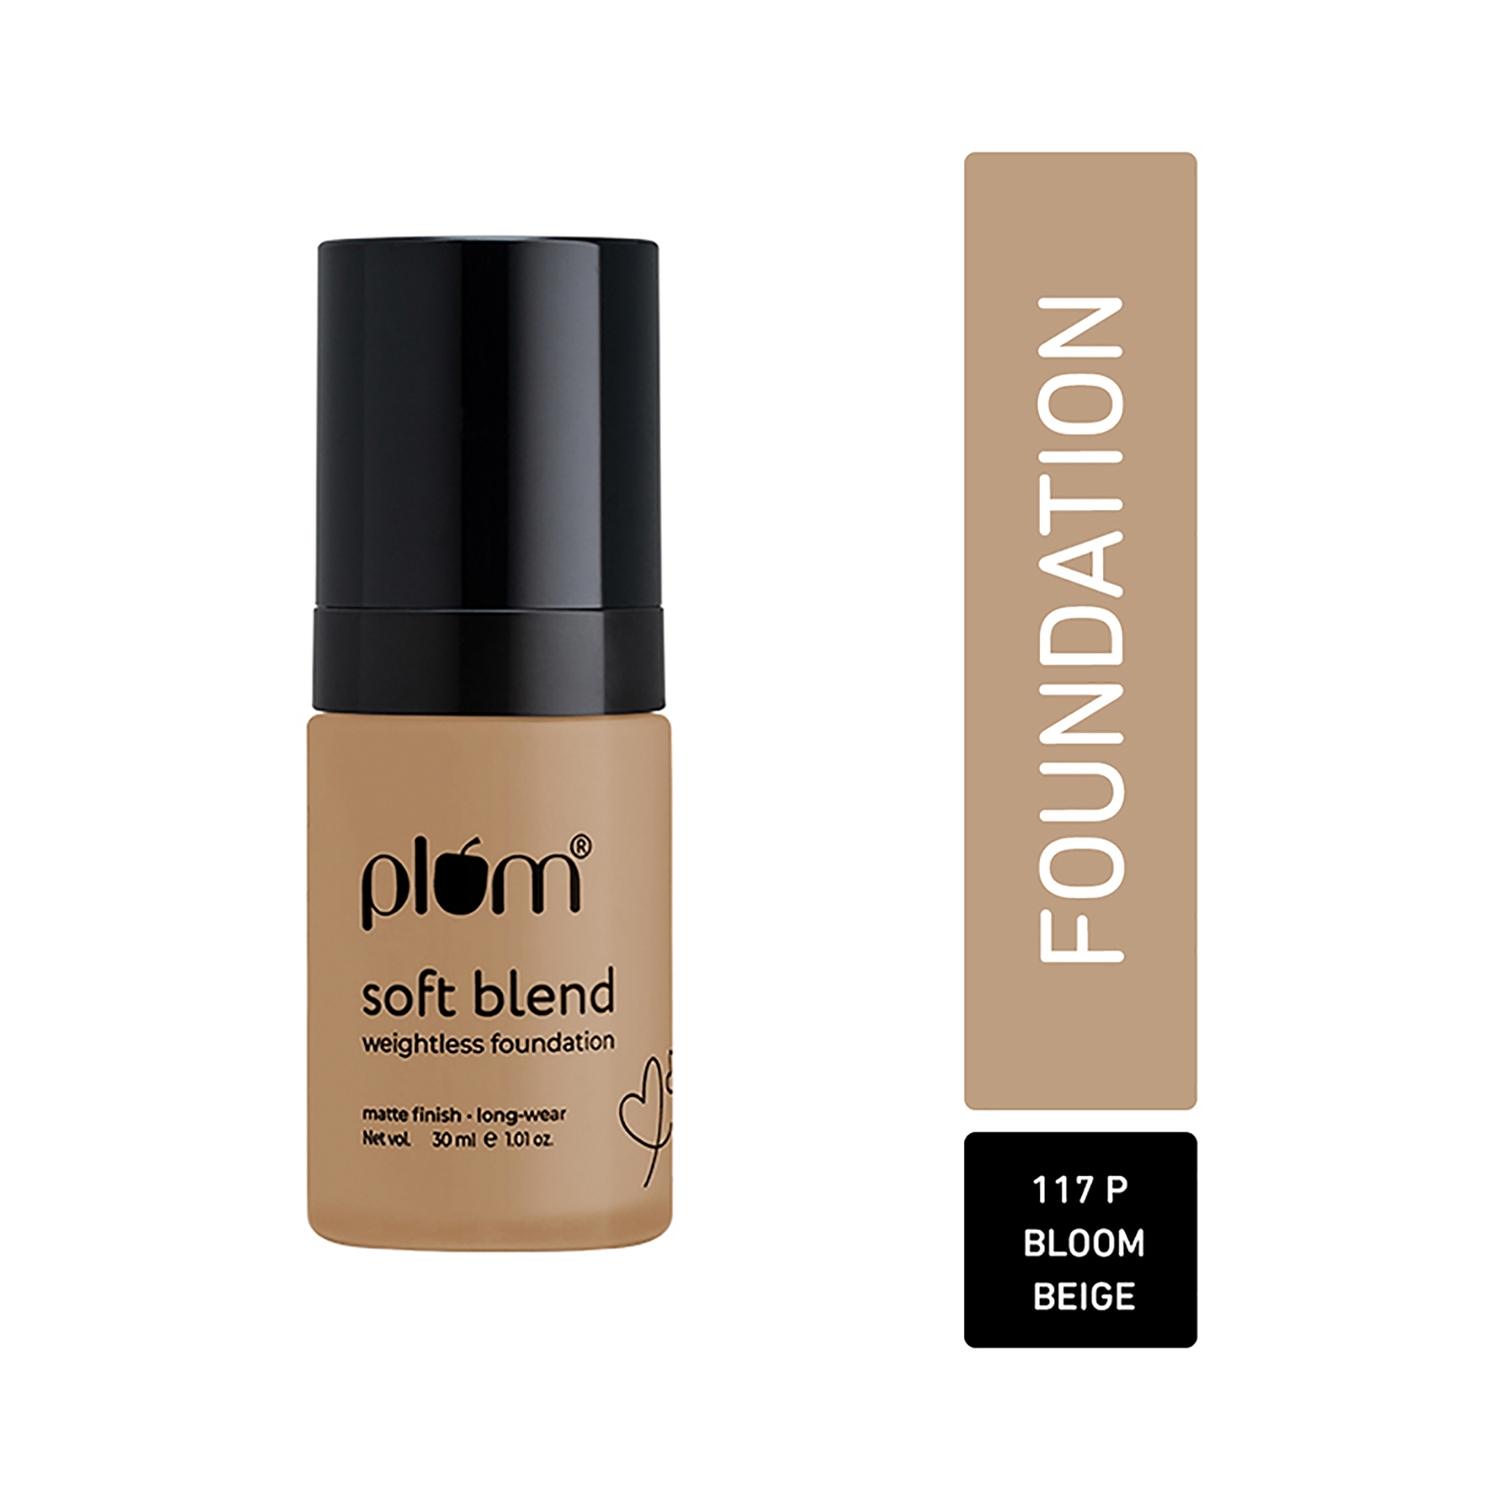 plum soft blend weightless foundation spf 15 with hyaluronic acid - 117p bloom beige (30ml)